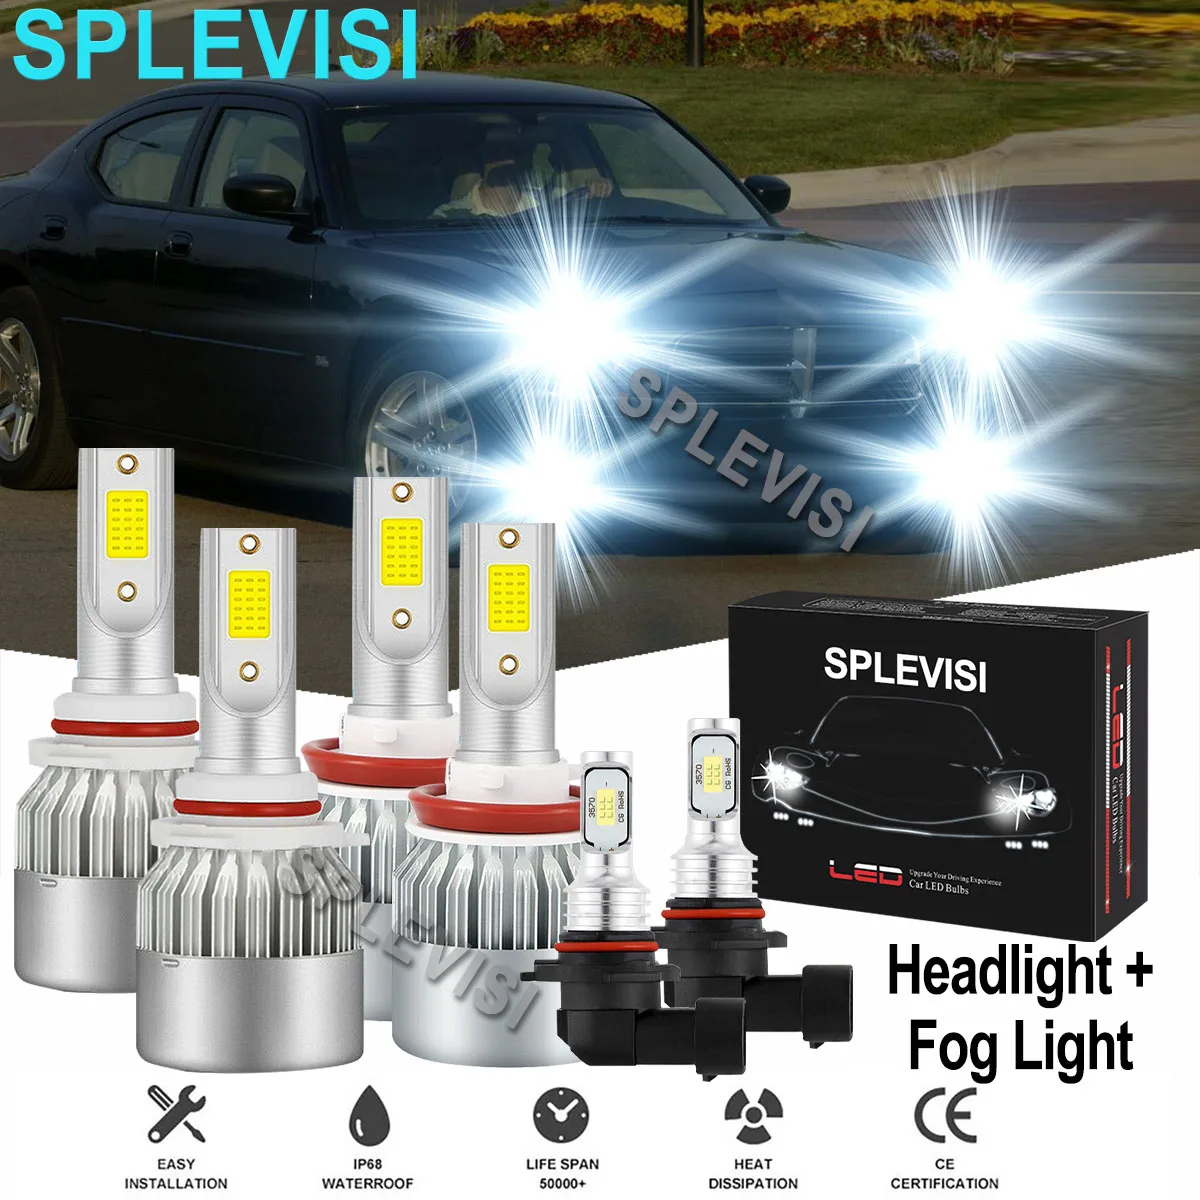 6x LED Pure White Headlight Fog Light Bulbs 6000K Fit For Dodge Charger 2006-2008  Ford Escape 2013-2016 Toyota Tundra 2007-2013